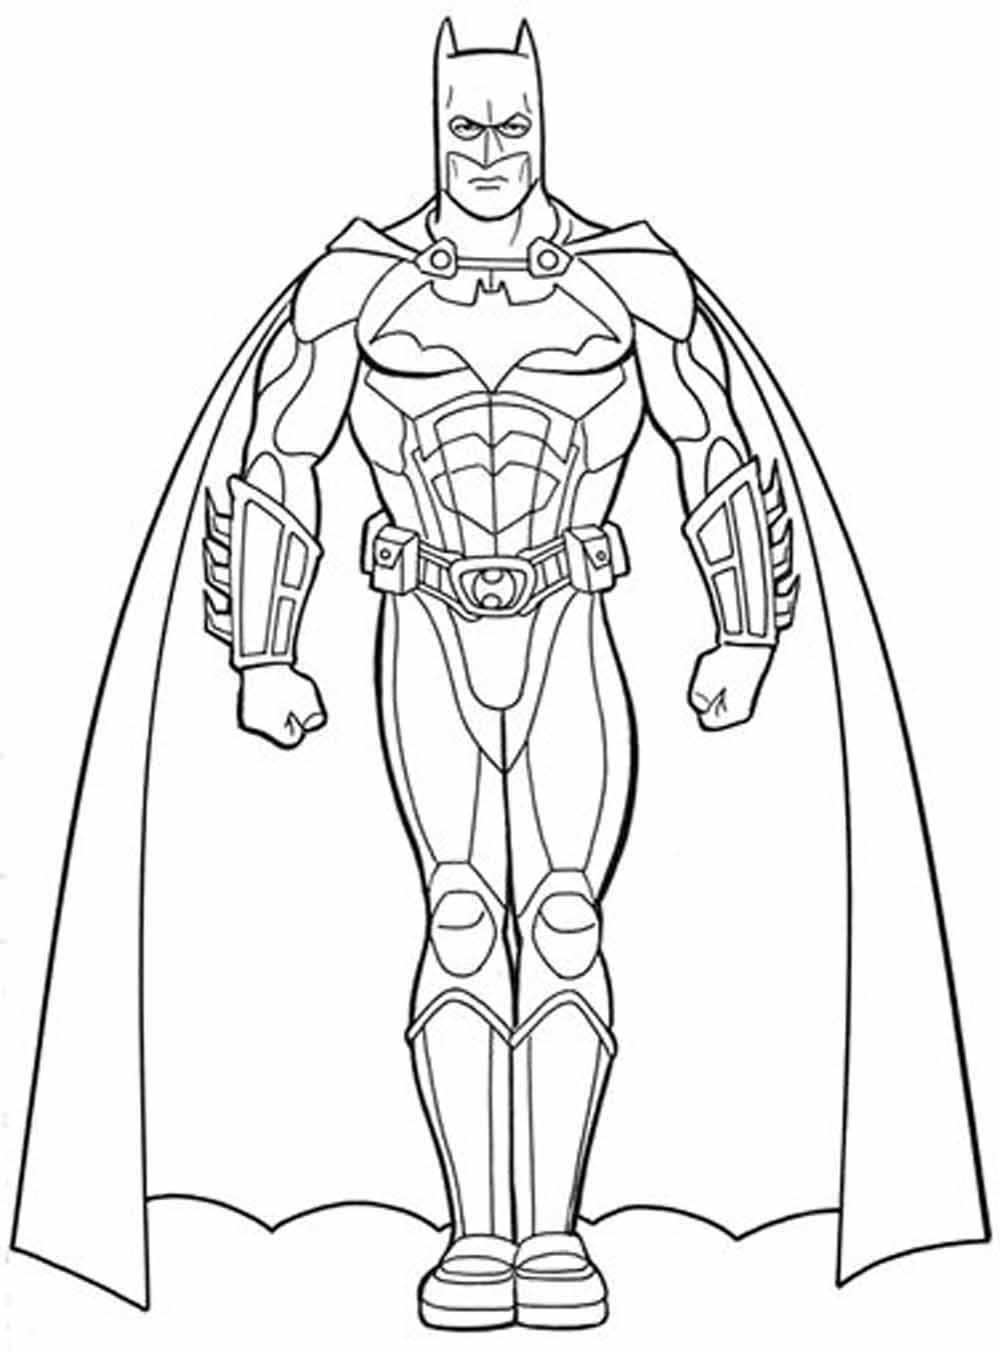 Download Print & Download - Batman Coloring Pages for Your Children